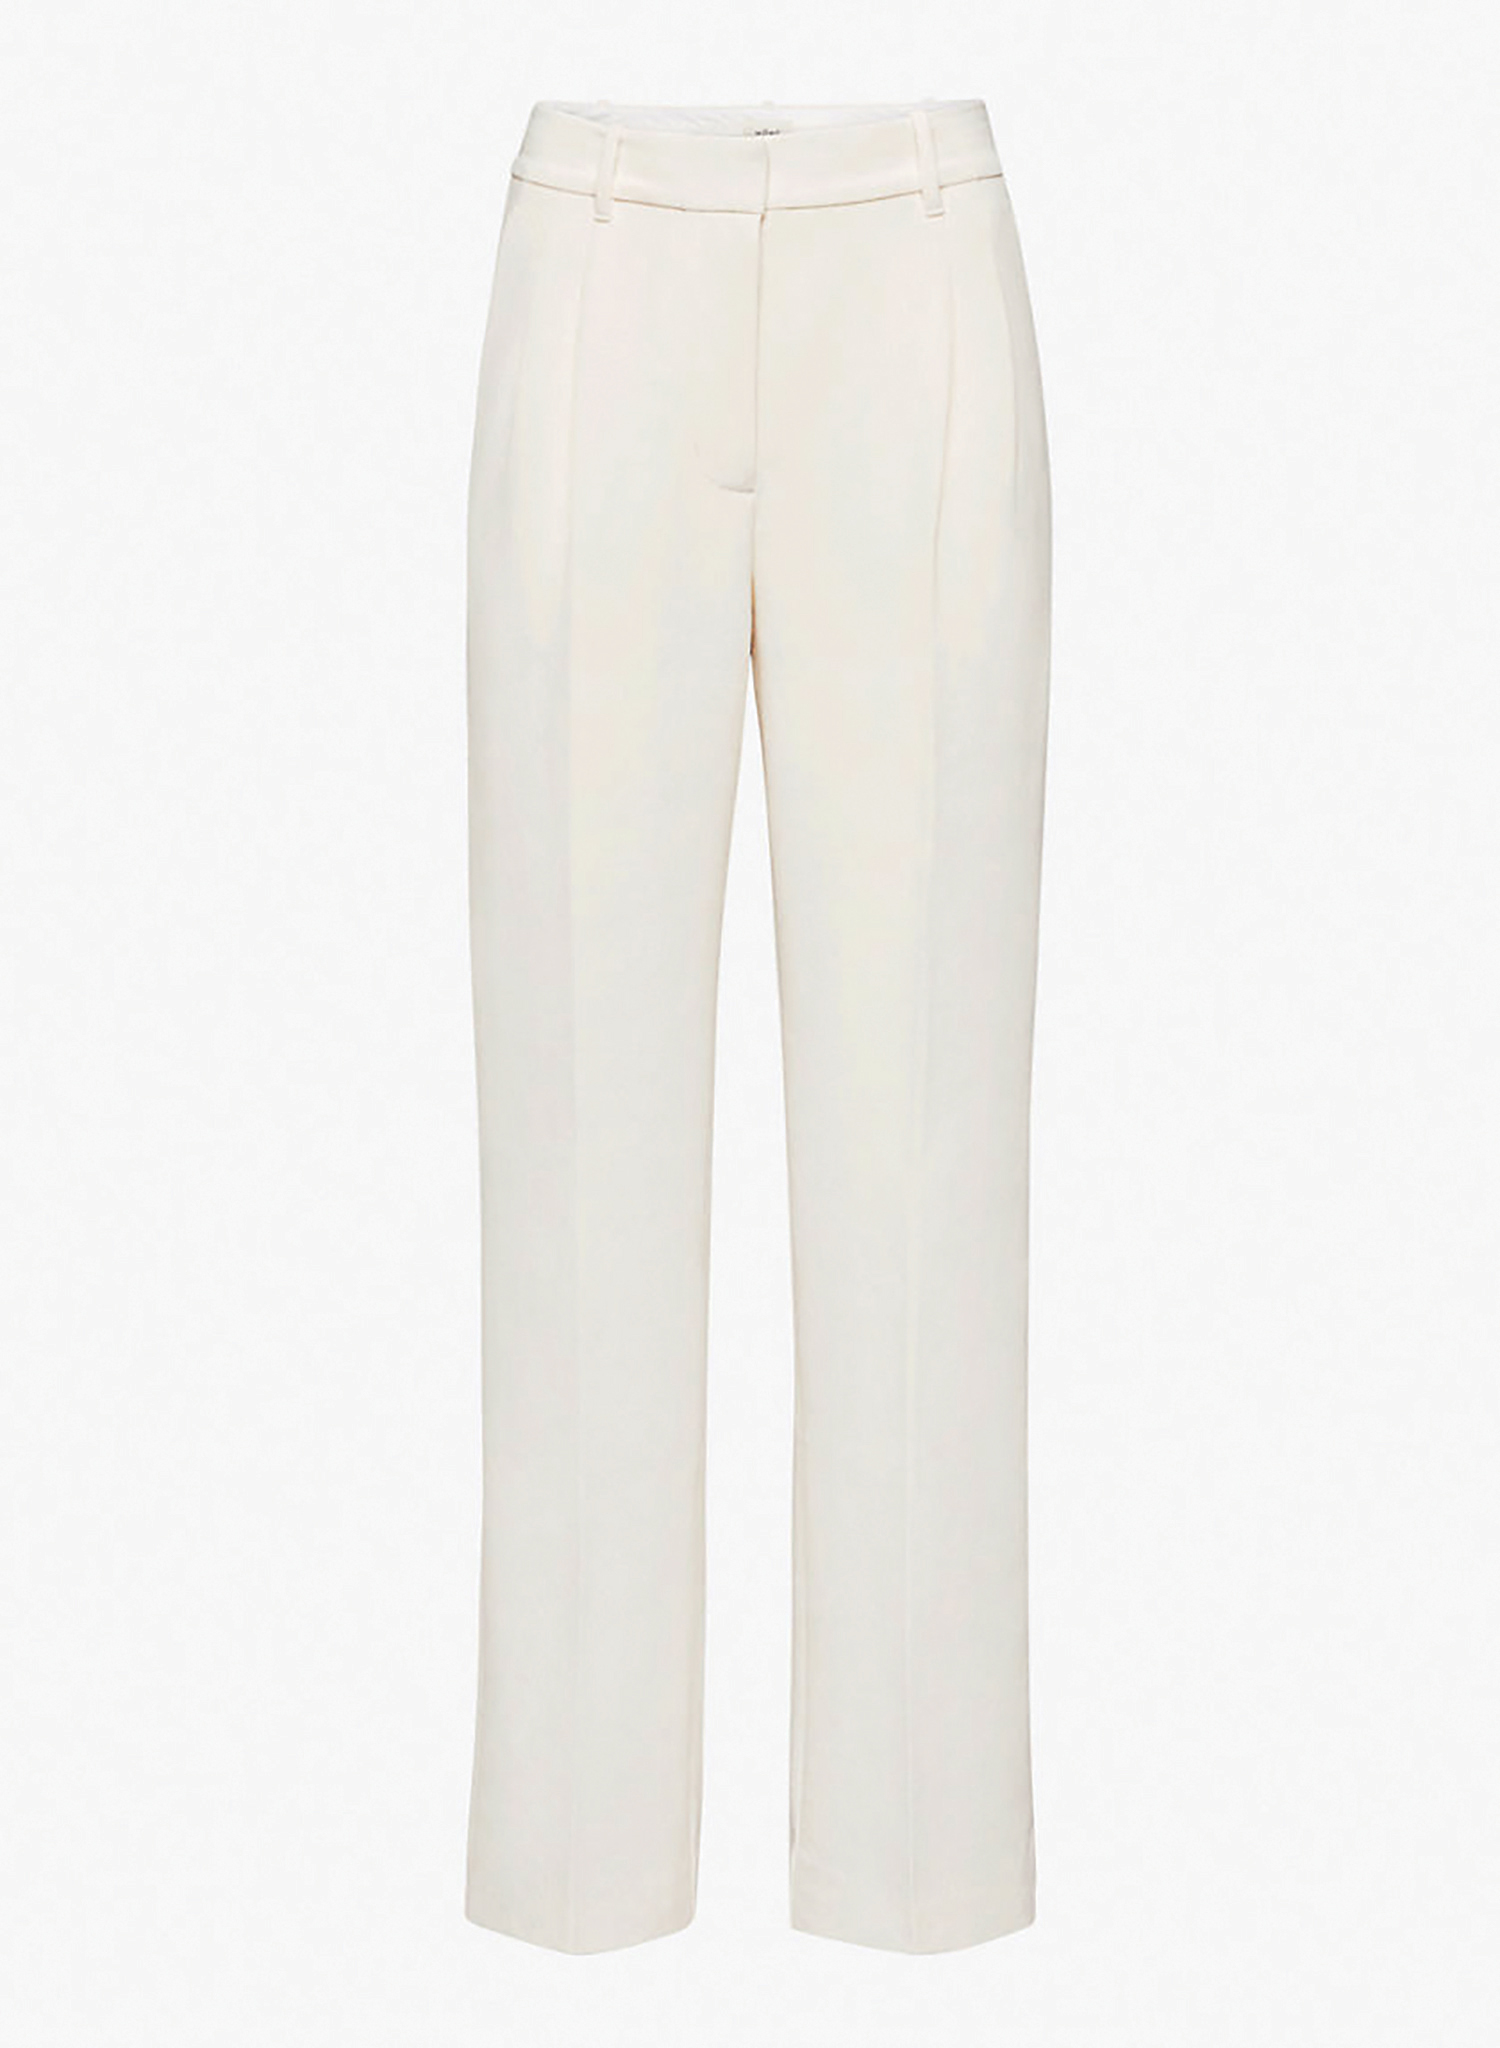 Aritzia The Effortless Pant, cute cold weather outfits